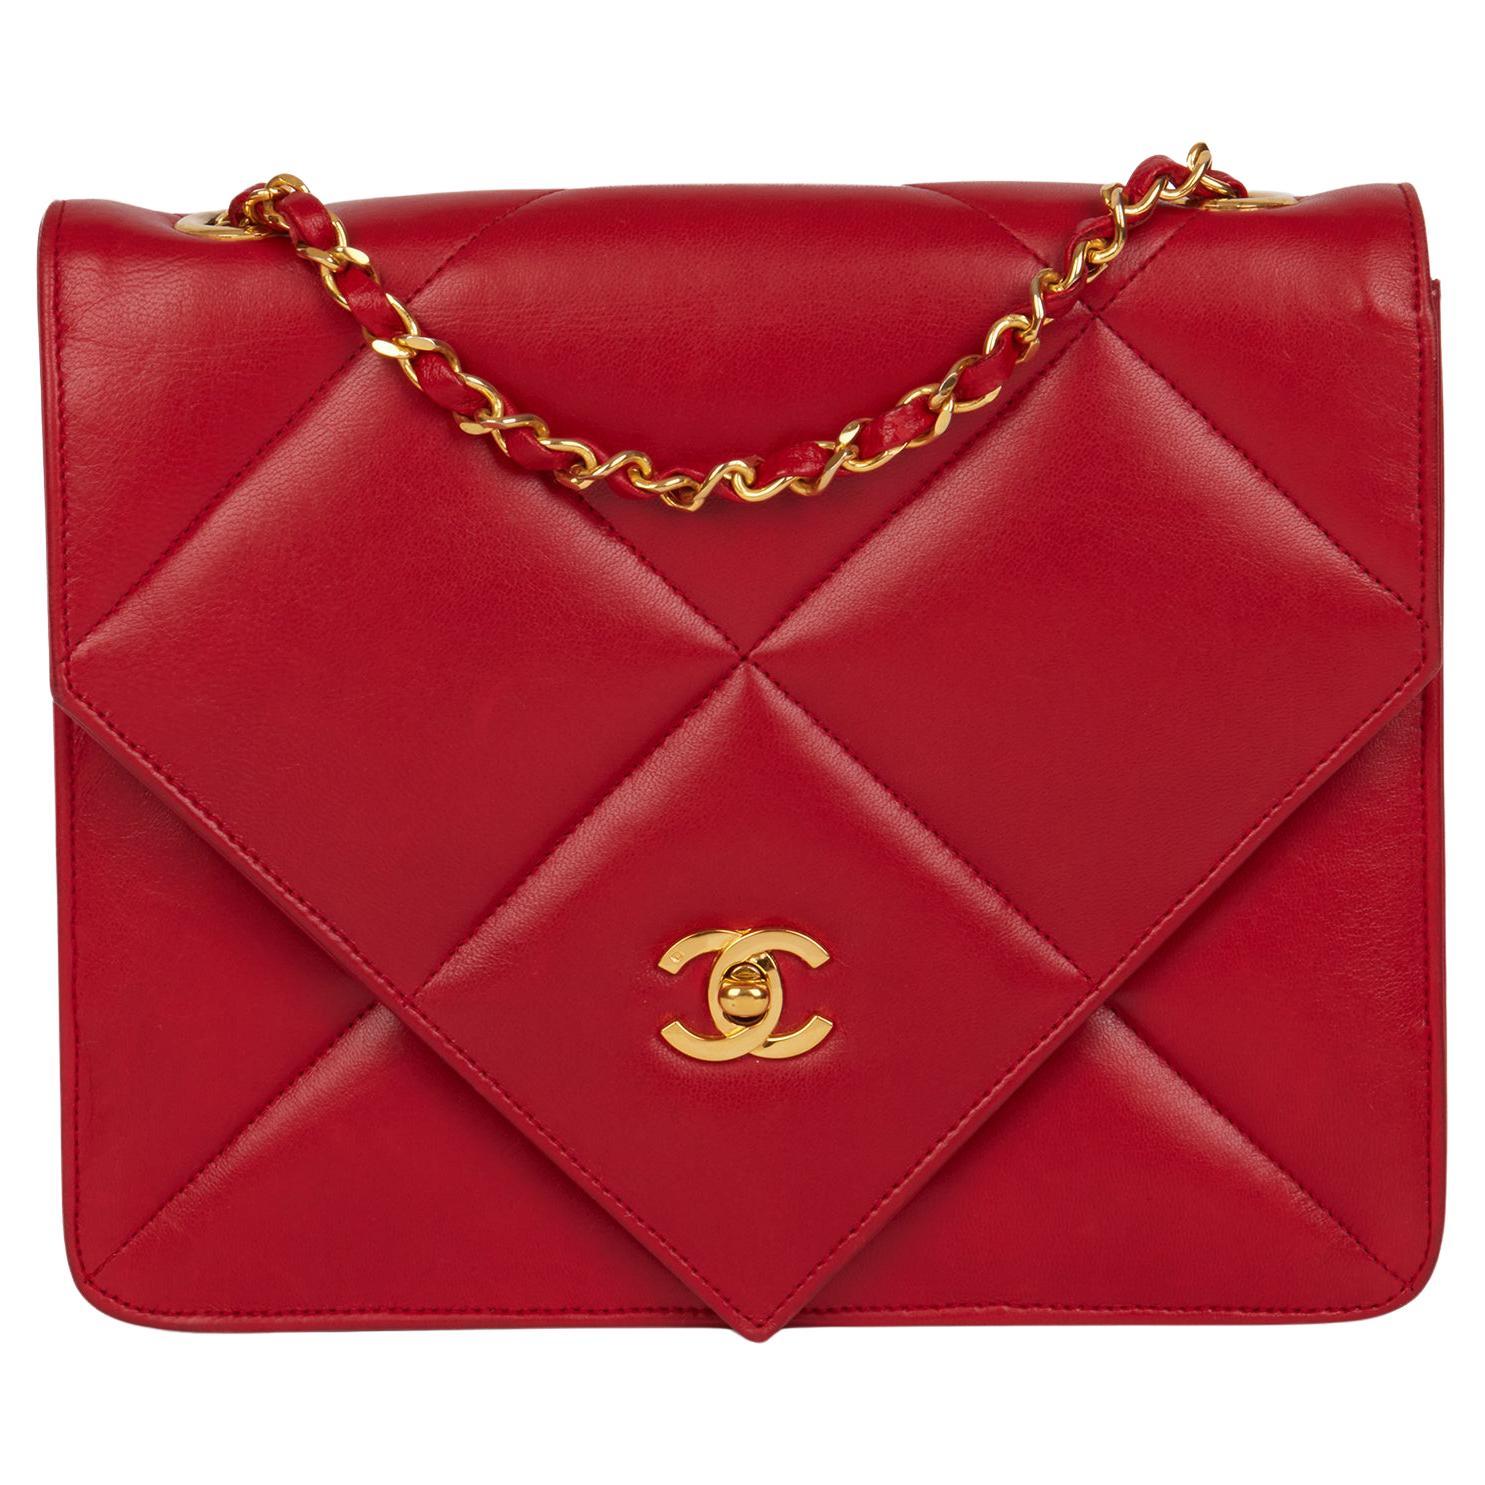 CHANEL Red Quilted Lambskin Vintage Classic Single Flap Bag